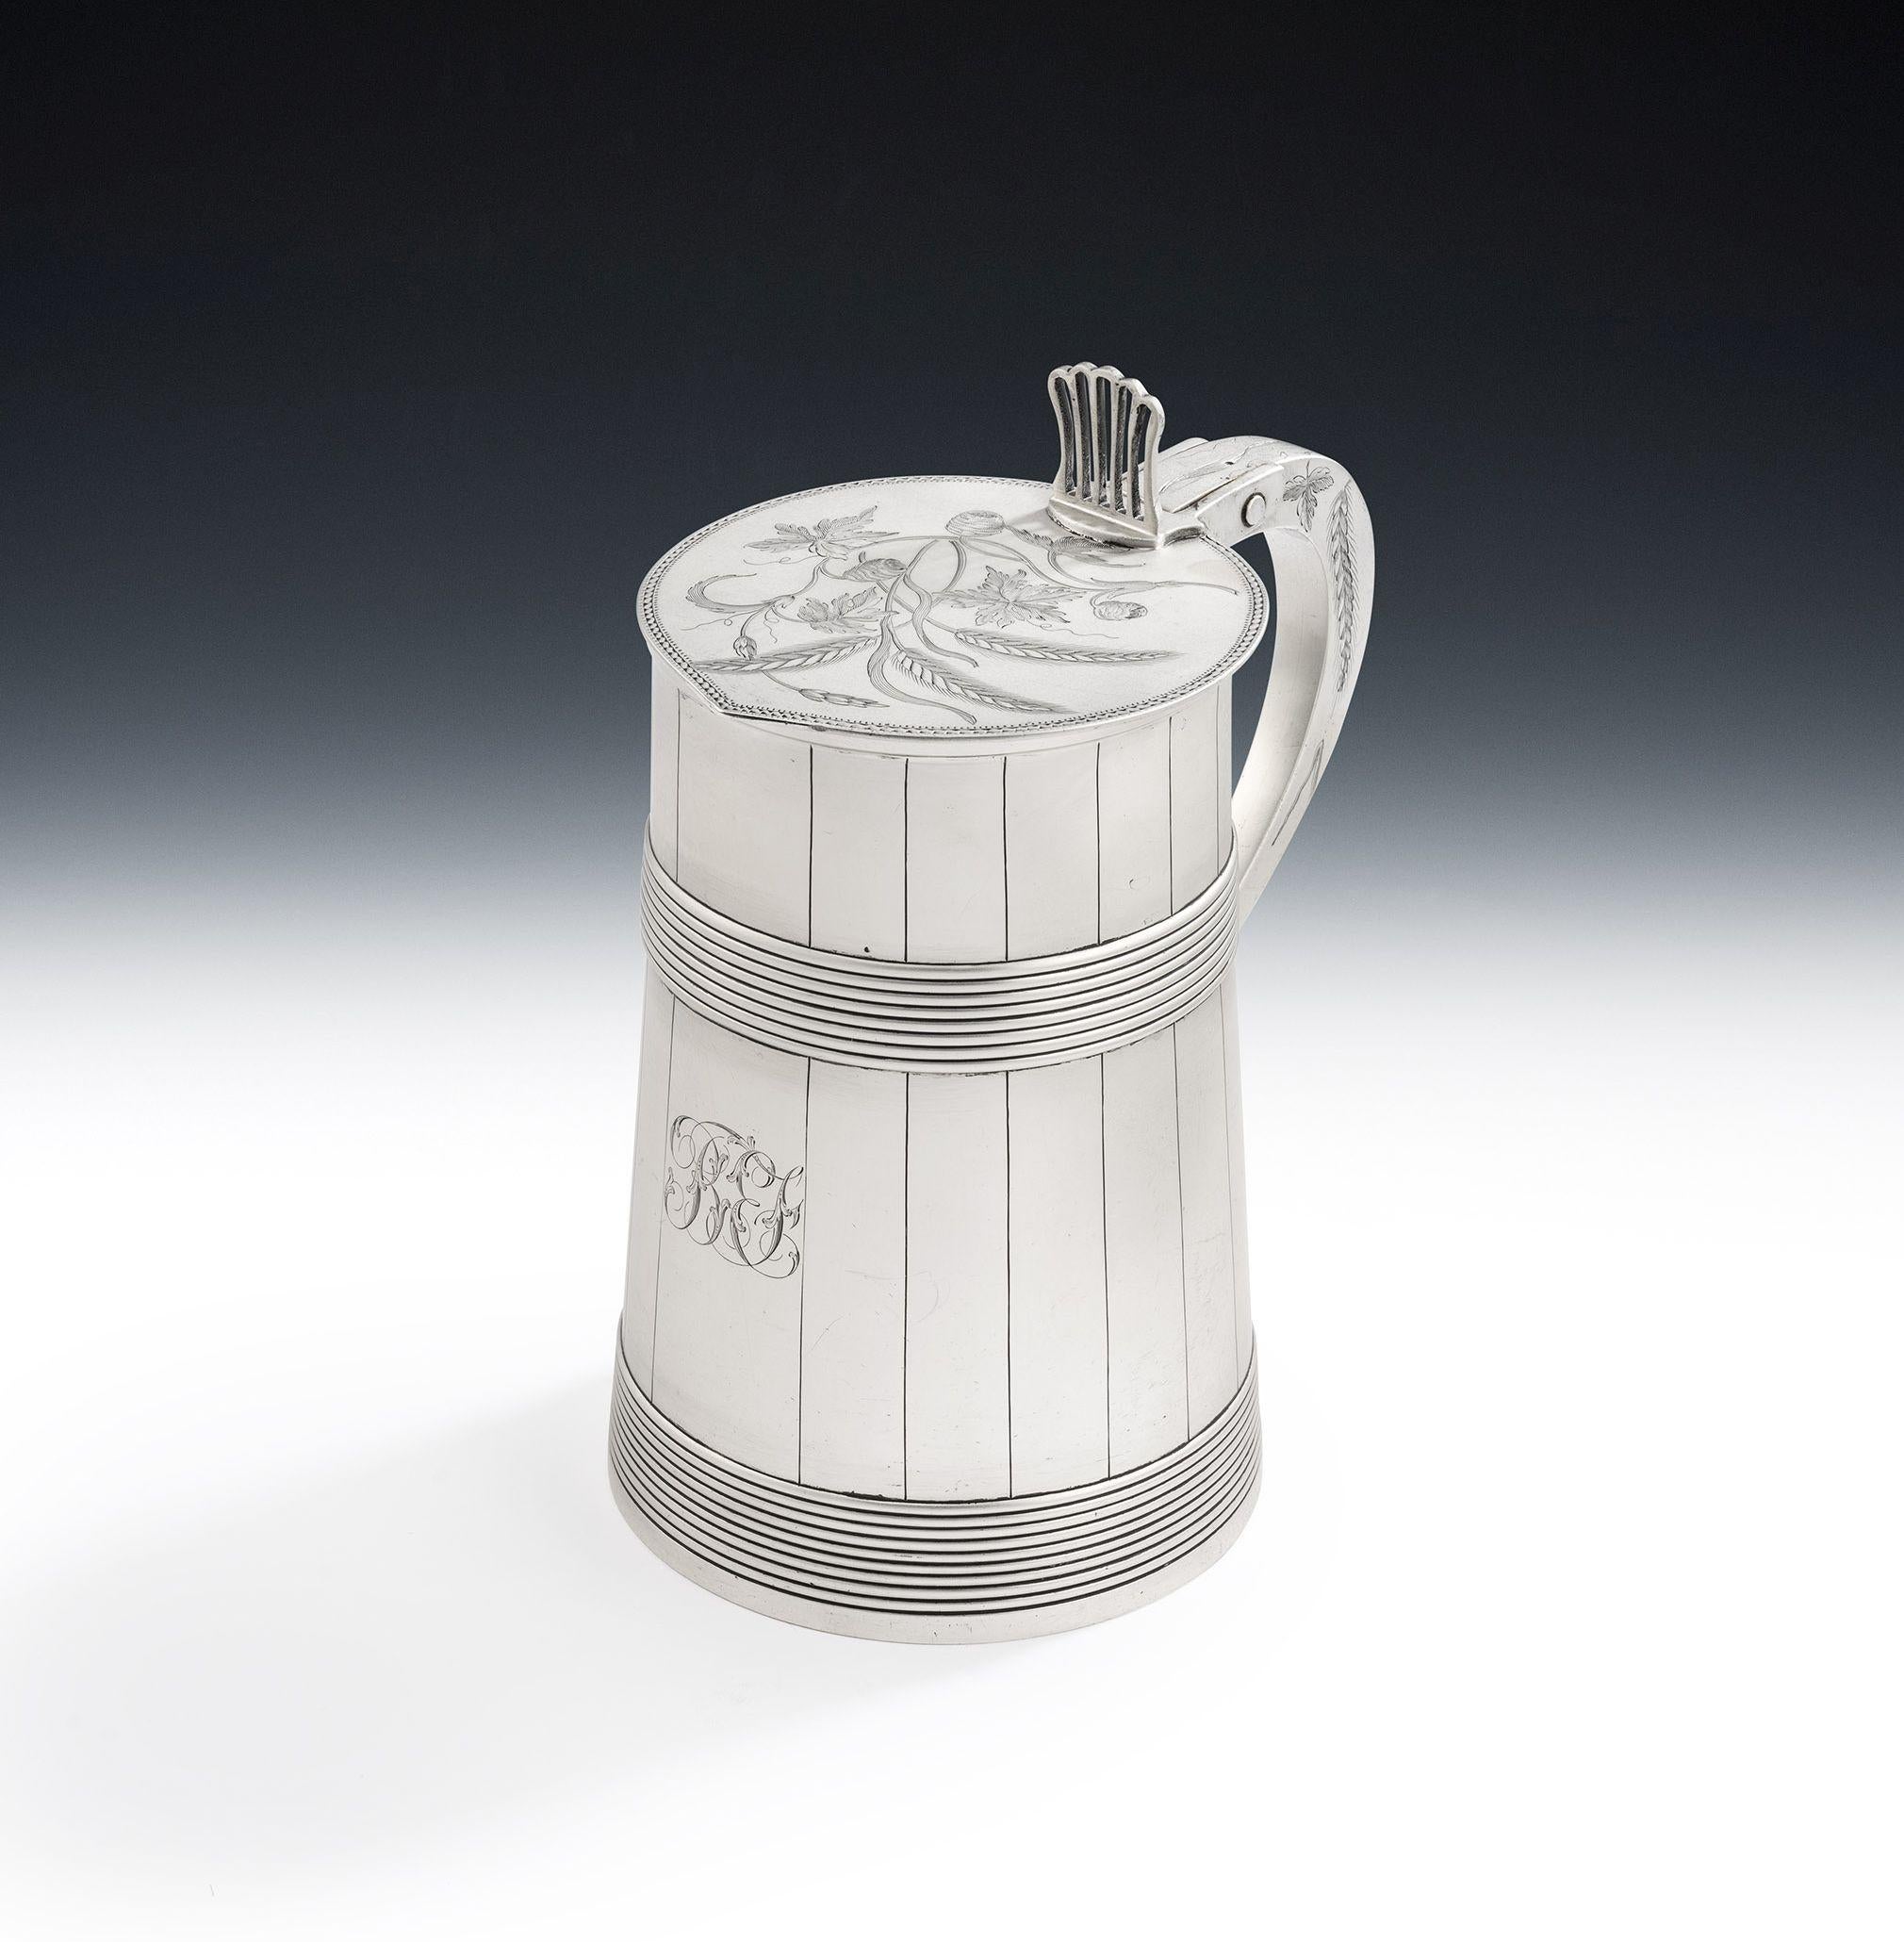 AN EXCEPTIONALLY RARE GEORGE III COOPERED BEER TANKARD MADE IN LONDON IN 1776 BY ROBERT MAKEPEACE I & RICHARD CARTER.

The Tankard is modelled to simulate a coopered beer barrel with slightly tapering sides engraved with vertical lines to simulate